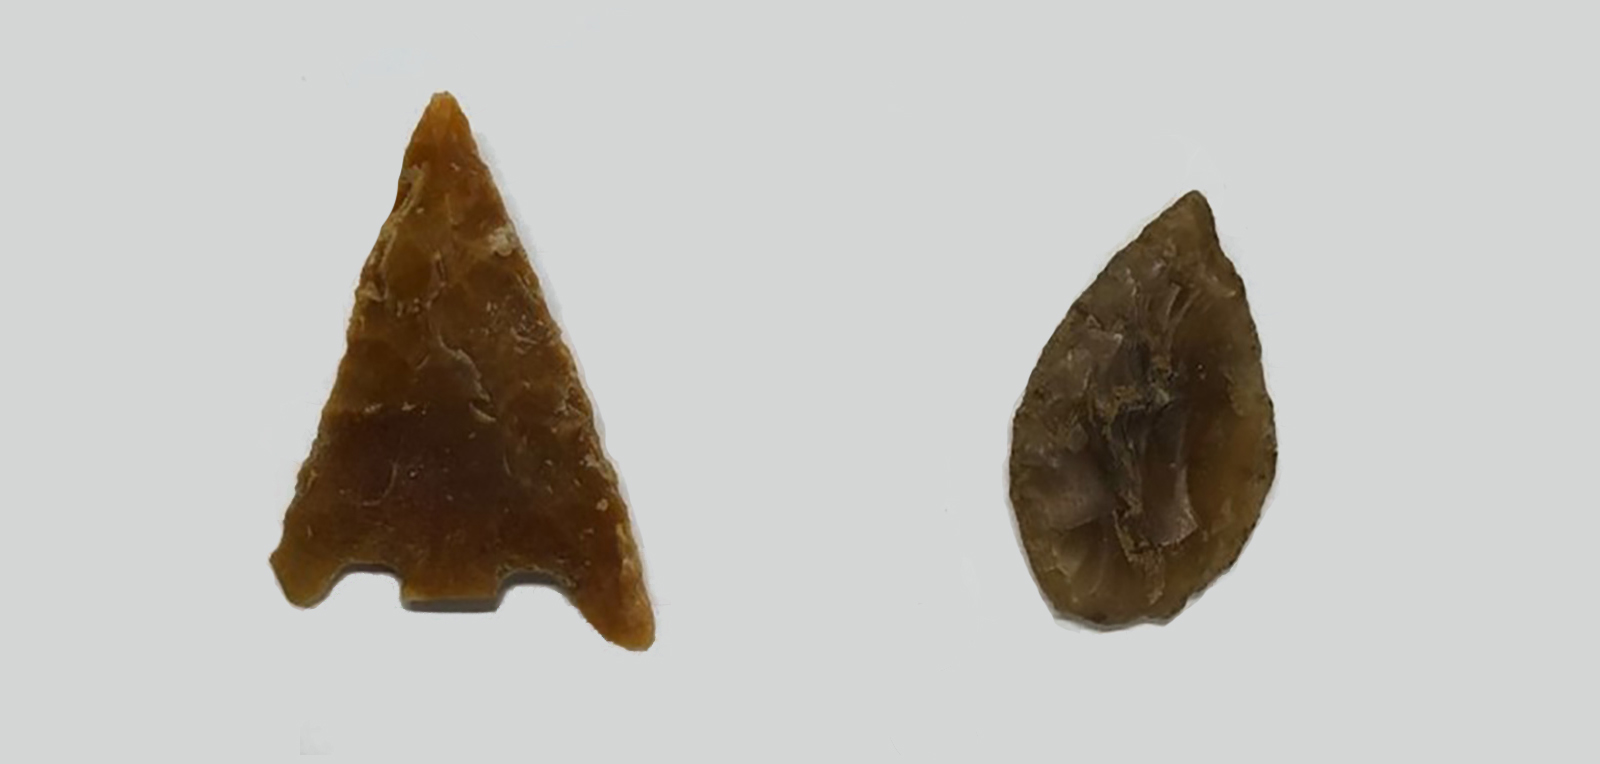 Flint arrow heads. The barbed and tanged example (left) is typical of the Bronze Age, whilst the leaf shape (right) dates from the Neolithic